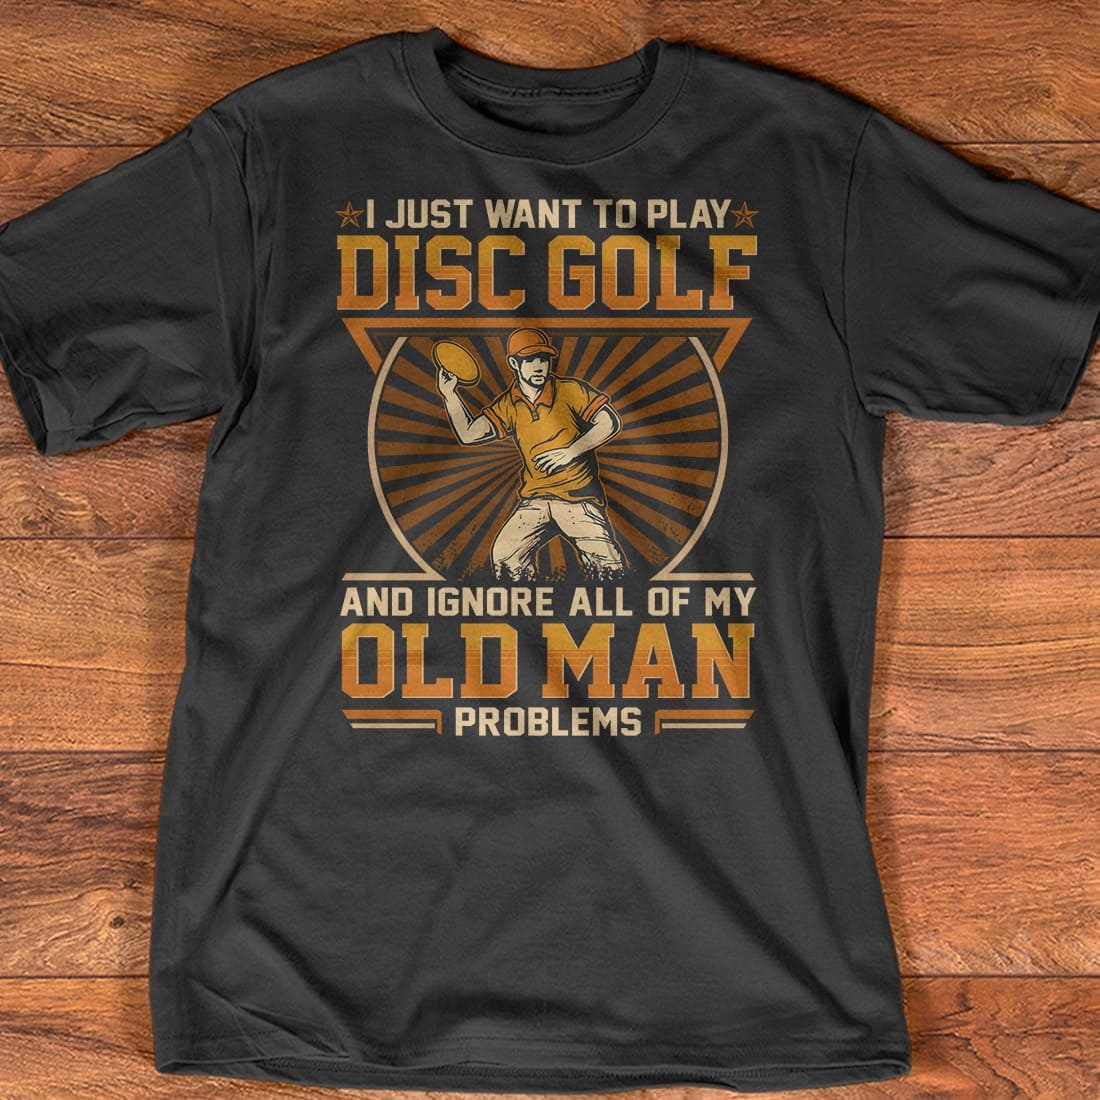 I just want to play disc golf and ignore all of my old man problems - Disc golfer T-shirt